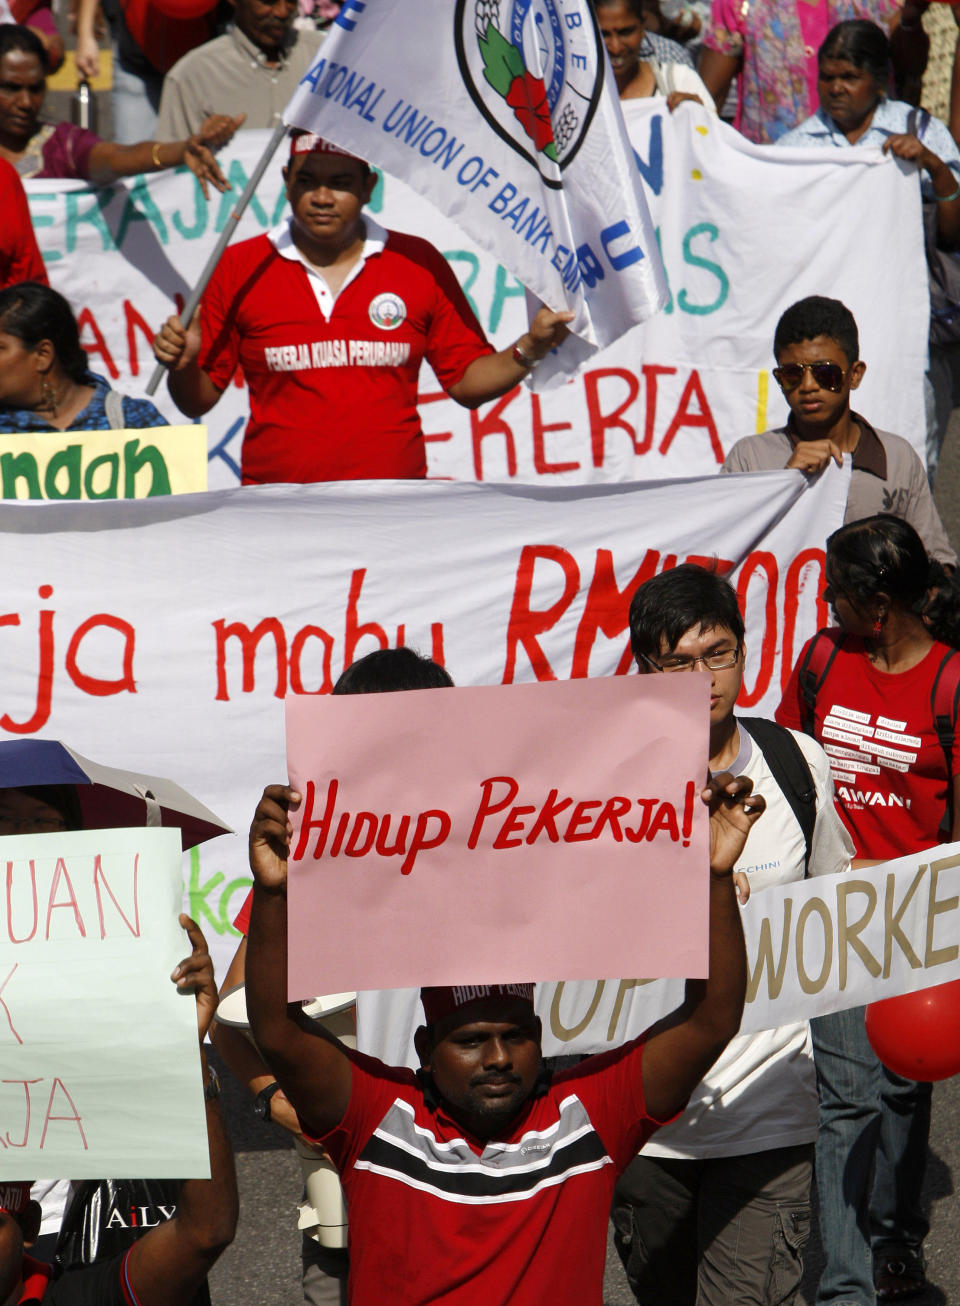 A worker holds a placard reading "Long Live Workers" during a May Day rally to call for a minimum wage law in Kuala Lumpur, Malaysia, Tuesday, May 1, 2012. (AP Photo/Lai Seng Sin)